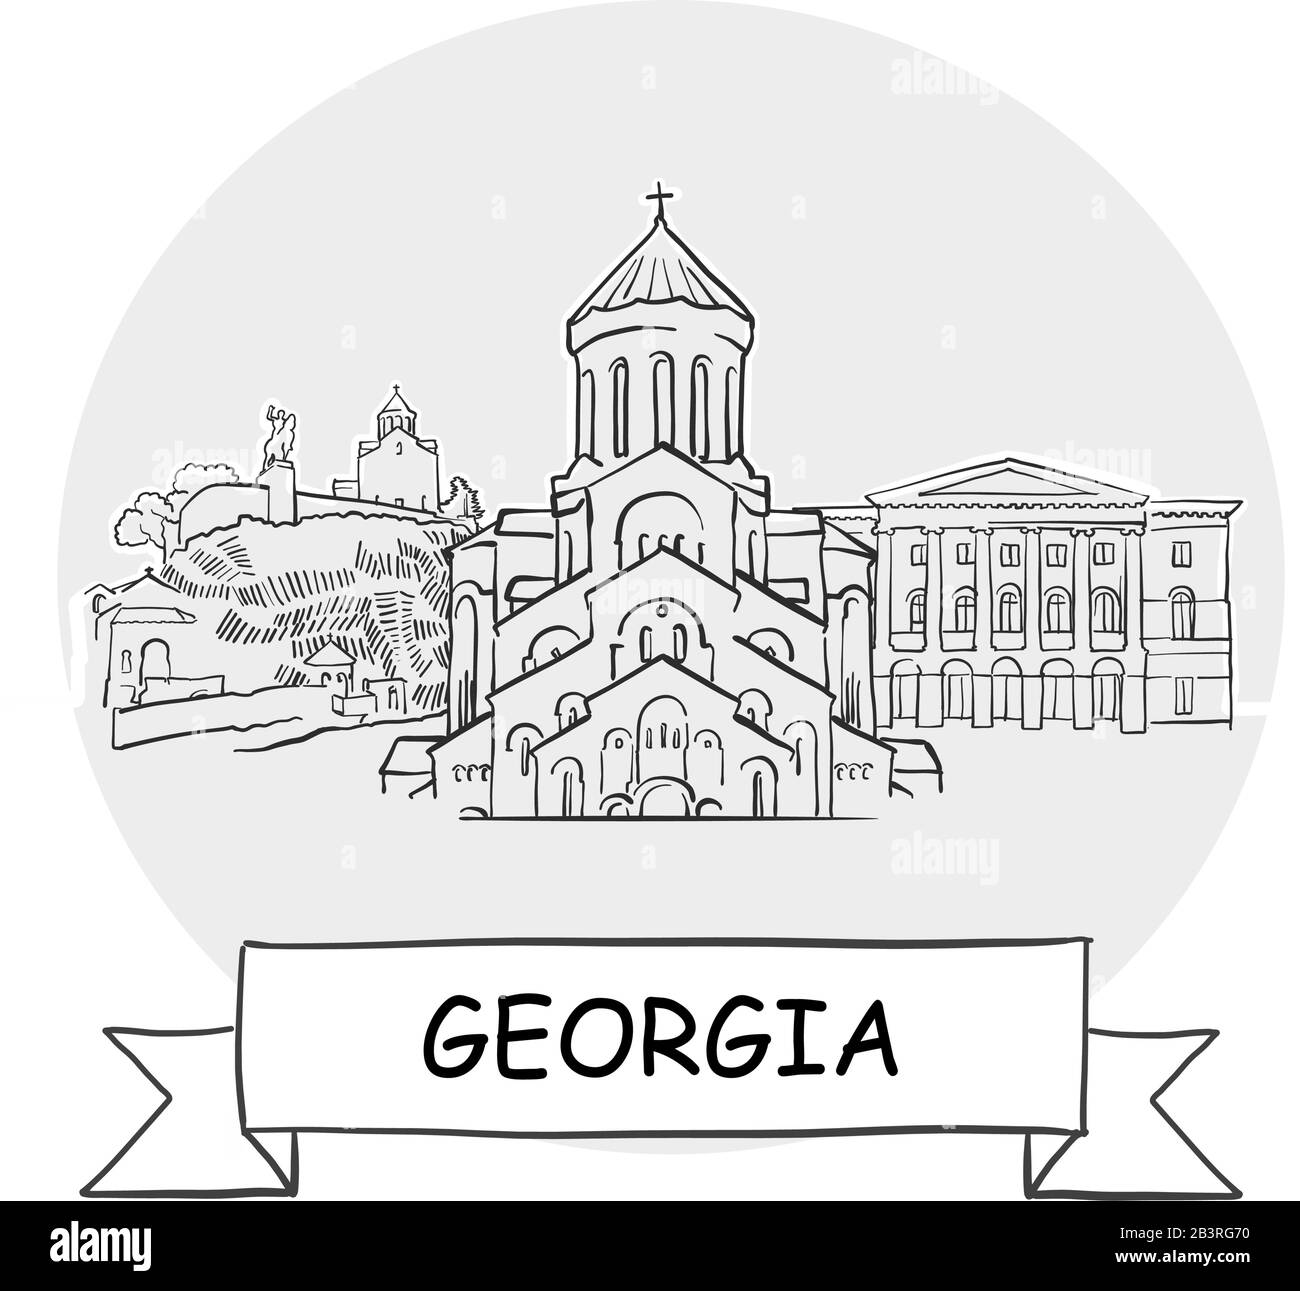 Georgia Hand-Drawn Urban Vector Sign. Black Line Art Illustration with Ribbon and Title. Stock Vector